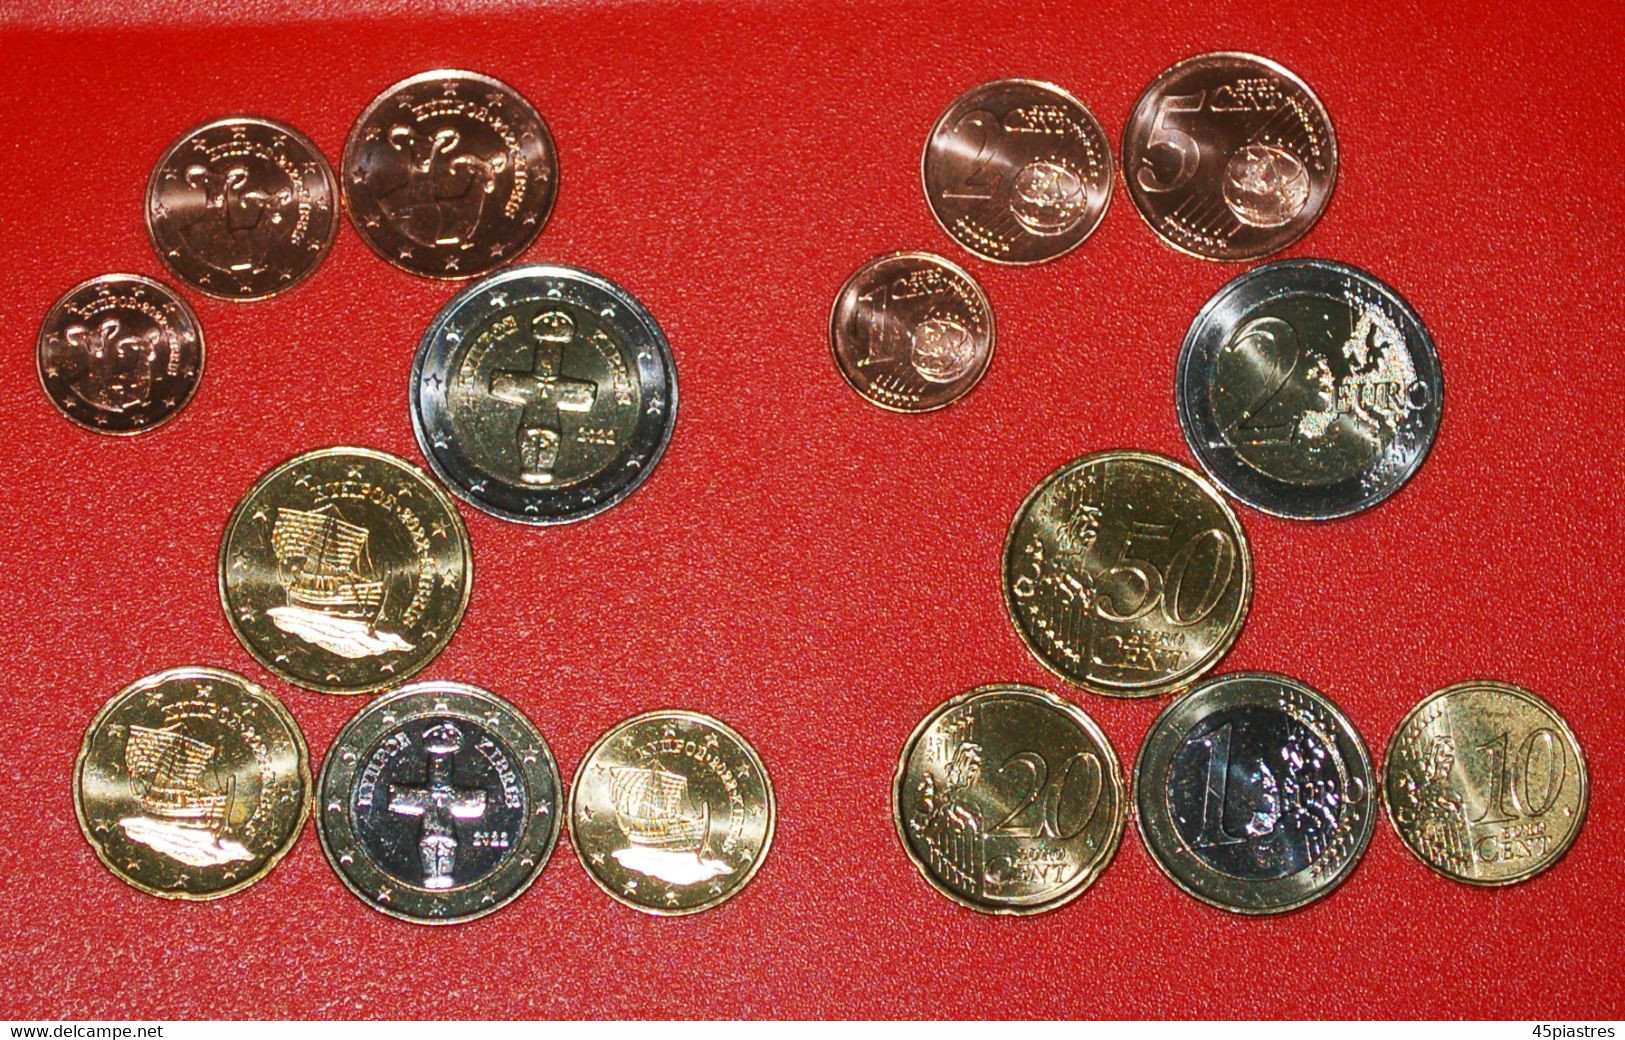 * GREECE: CYPRUS ★ EURO SET 8 COINS 2022 SHIPS AND ANIMALS UNC! LOW START ★ NO RESERVE! - Zypern